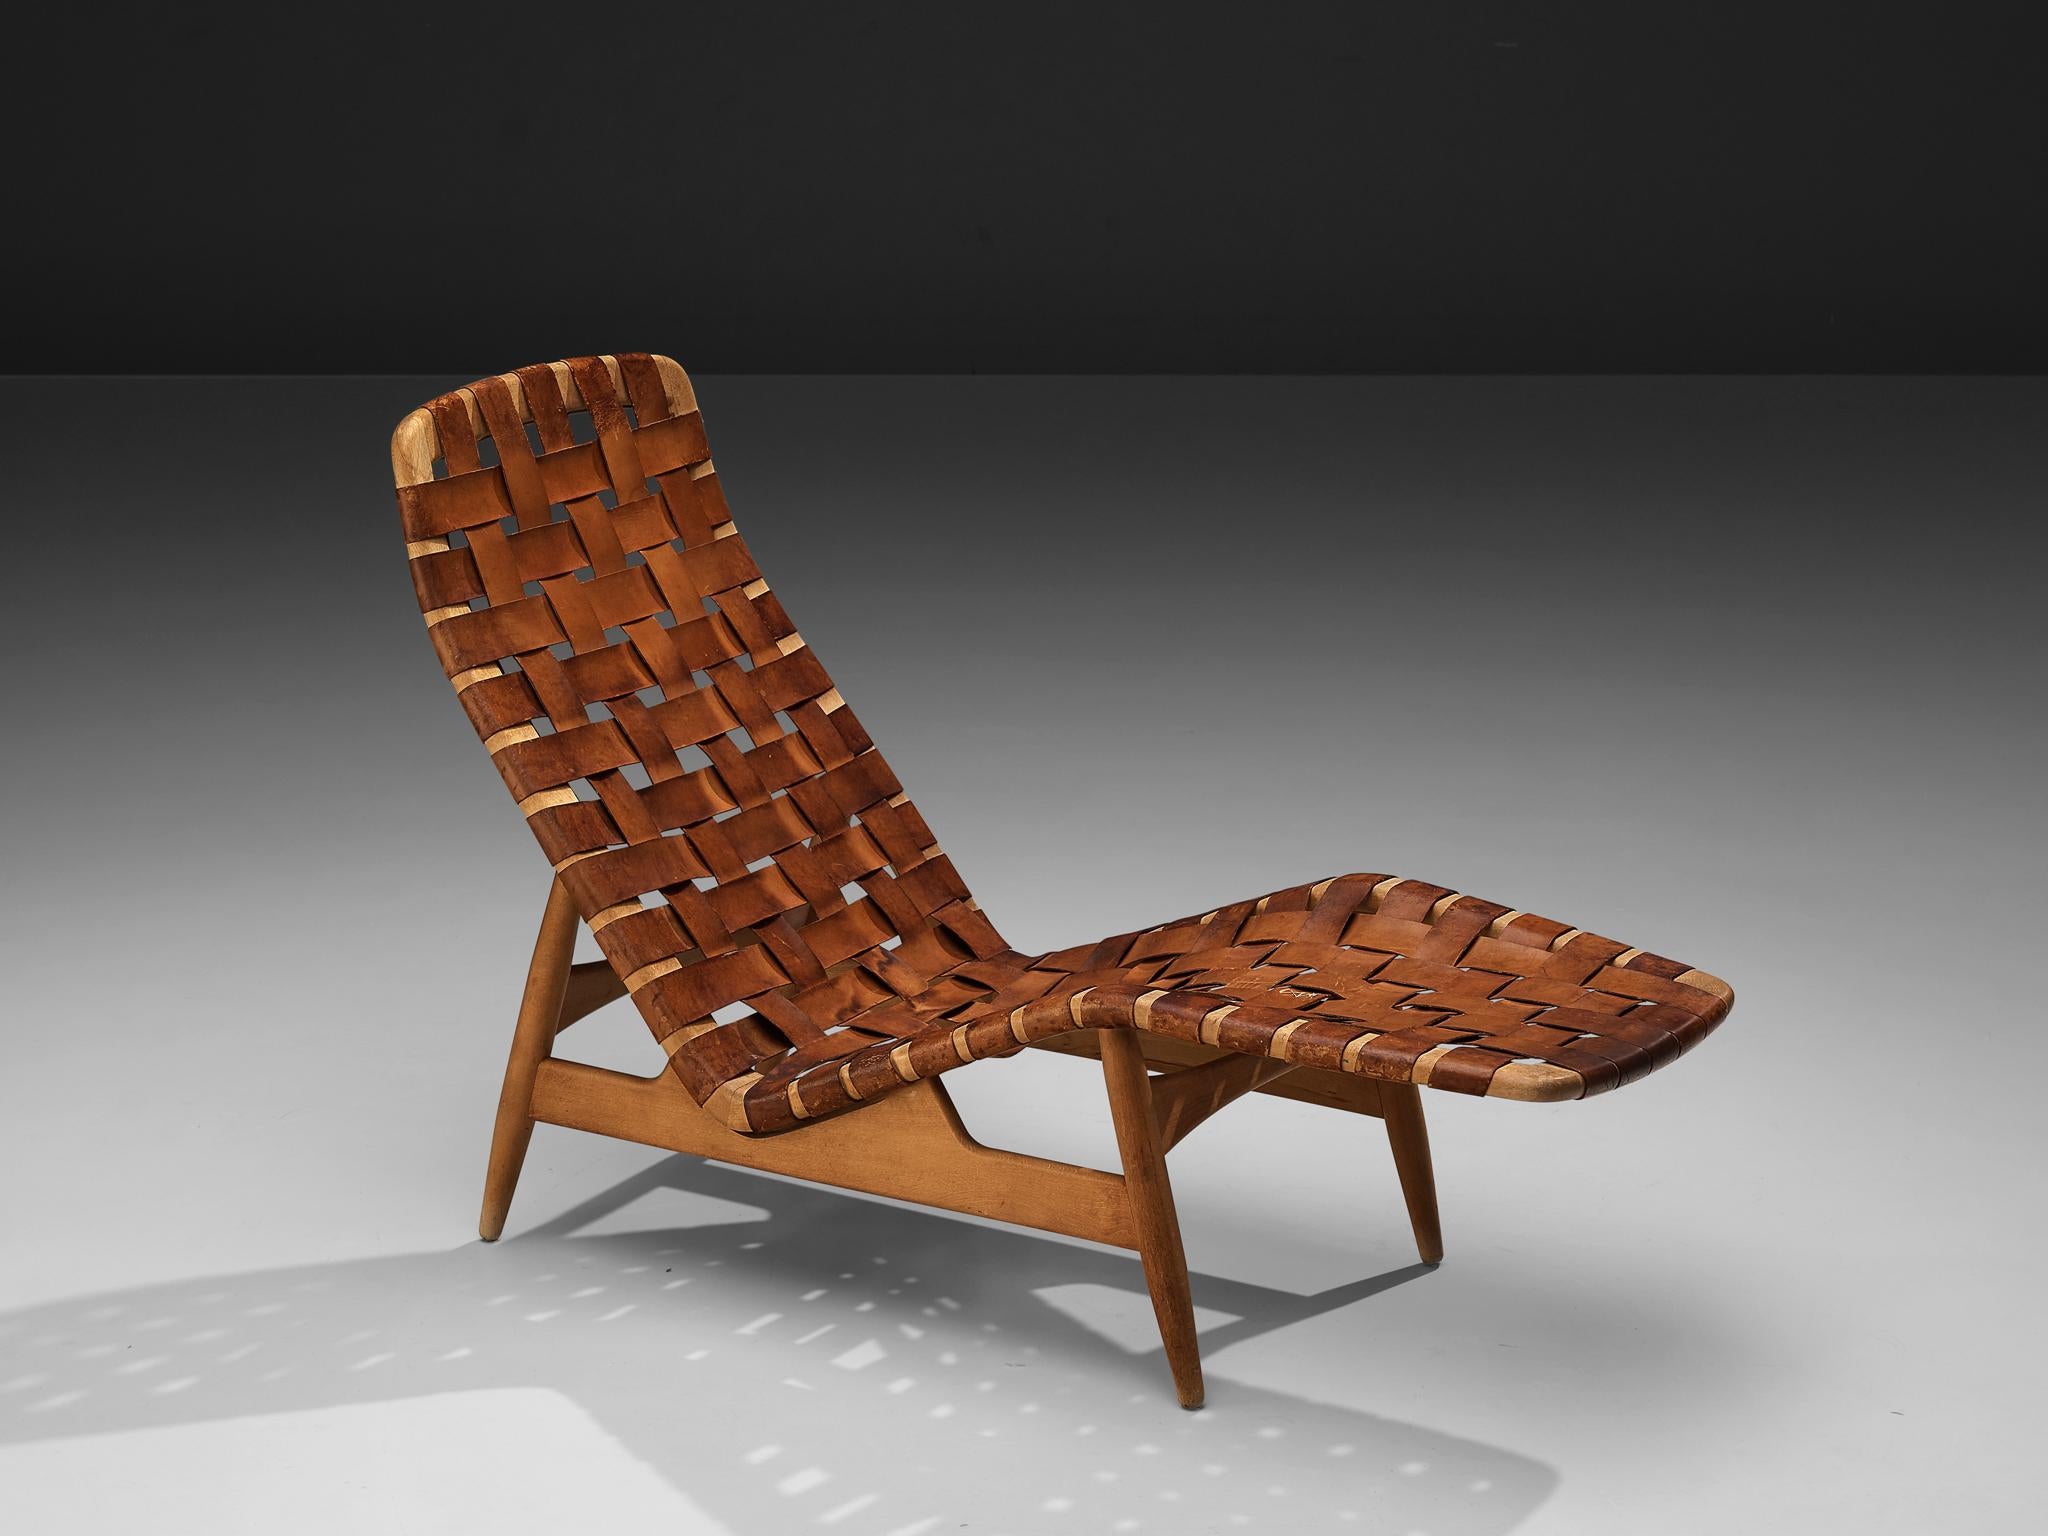 Arne Vodder for Bovirke, chaise lounge, leather, beech, Denmark, 1950s

Rare chaise longue, designed by Arne Vodder for Bovirke, circa 1950. This chaise lounge has an open frame in beech wood and a seating created of braided leather straps. The